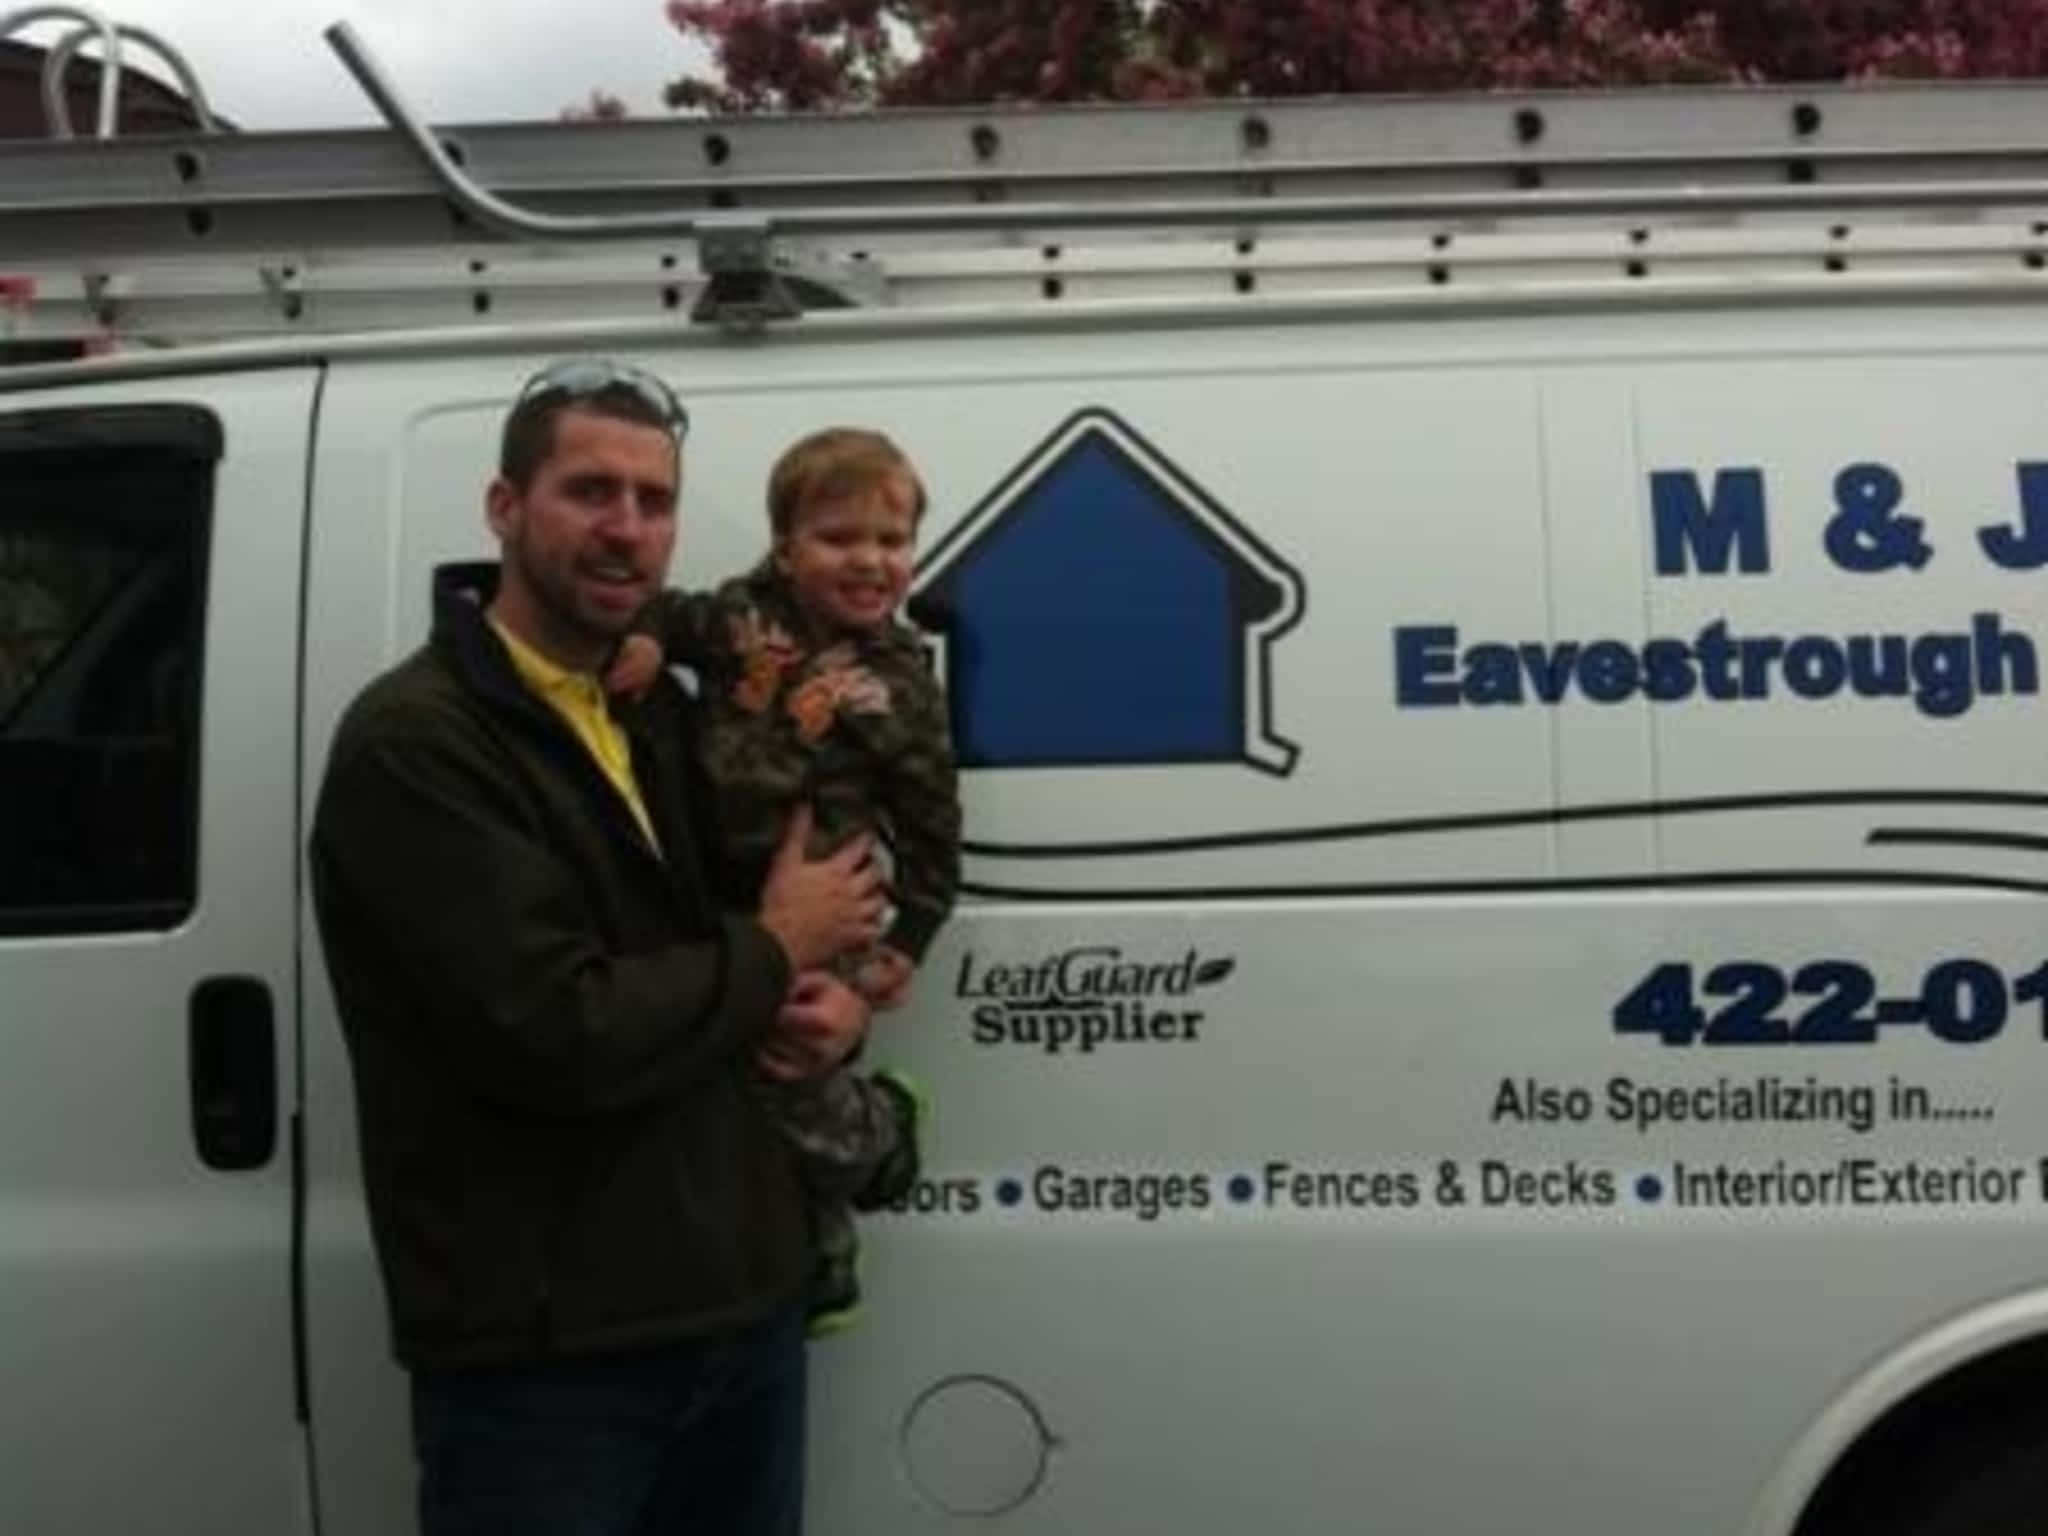 photo M&J's Eavestrough & Contracting